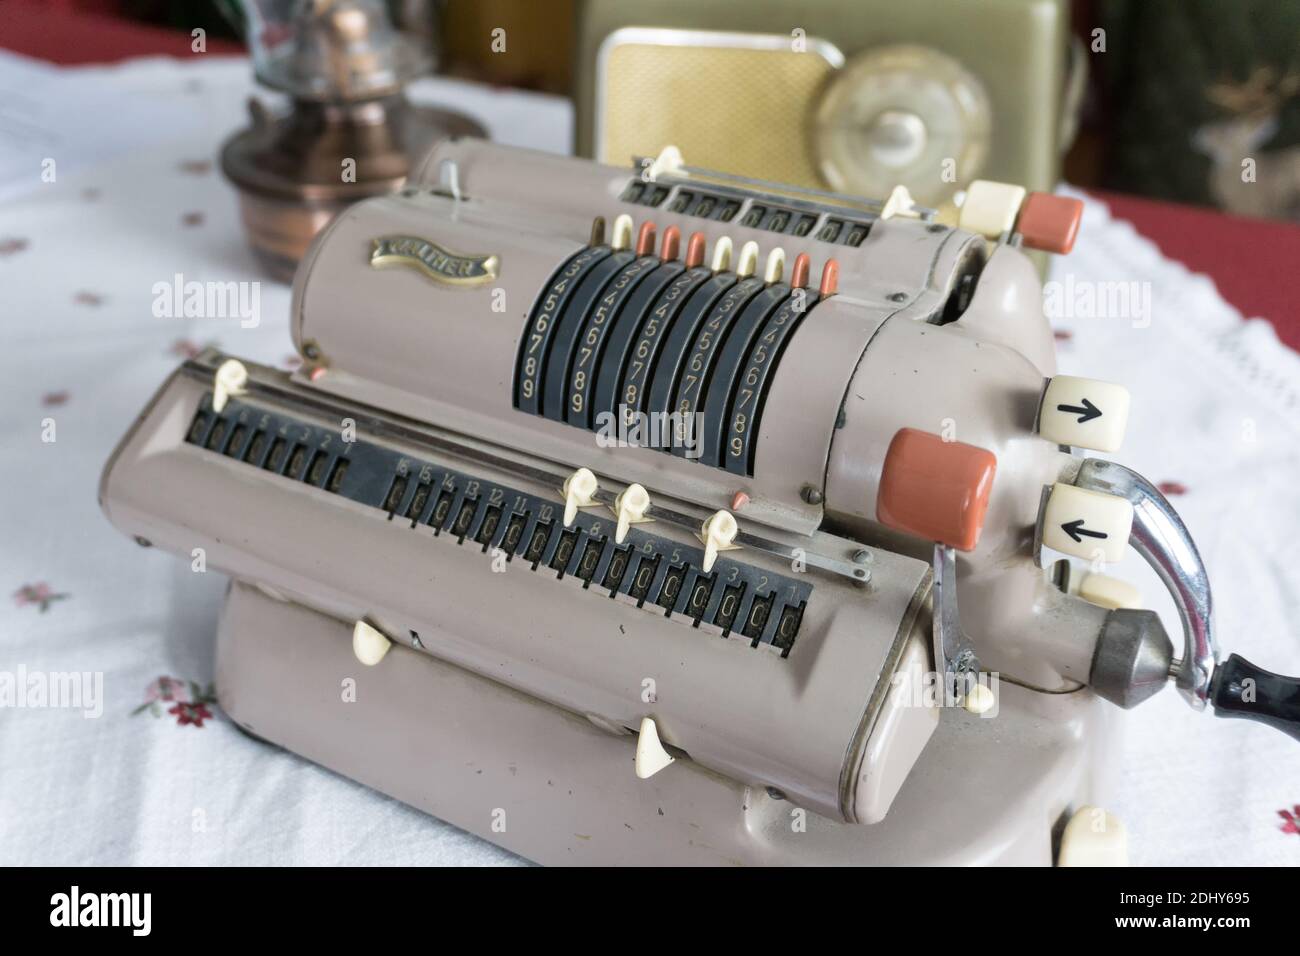 EHRWALD, AUSTRIA - JANUARY 7, 2019: Vintage technical equipment. Walther's mechanical calculating machine with vintage radio receiver and  kerosene la Stock Photo